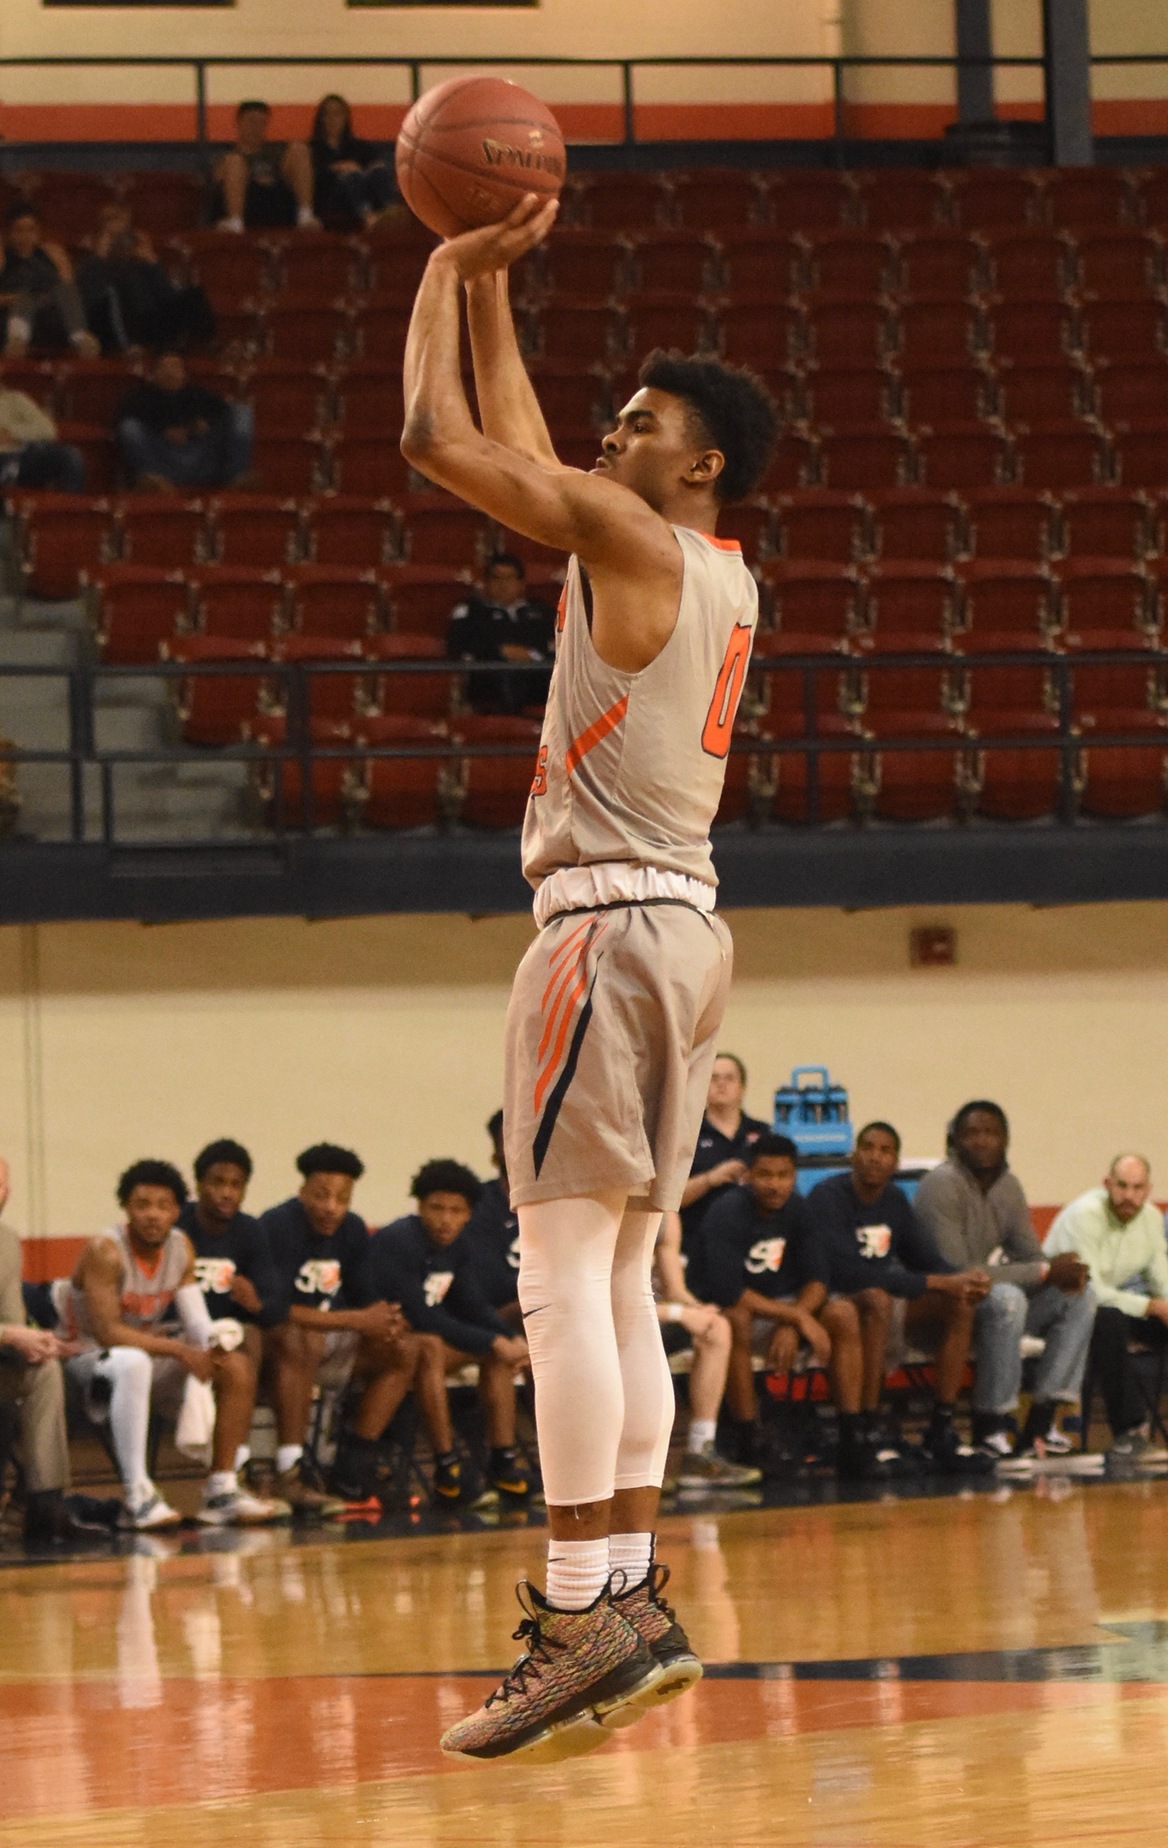 Gilbert drops in 27 points as No. 9 Texans dismantle New Mexico Military Institute 103-52 Monday